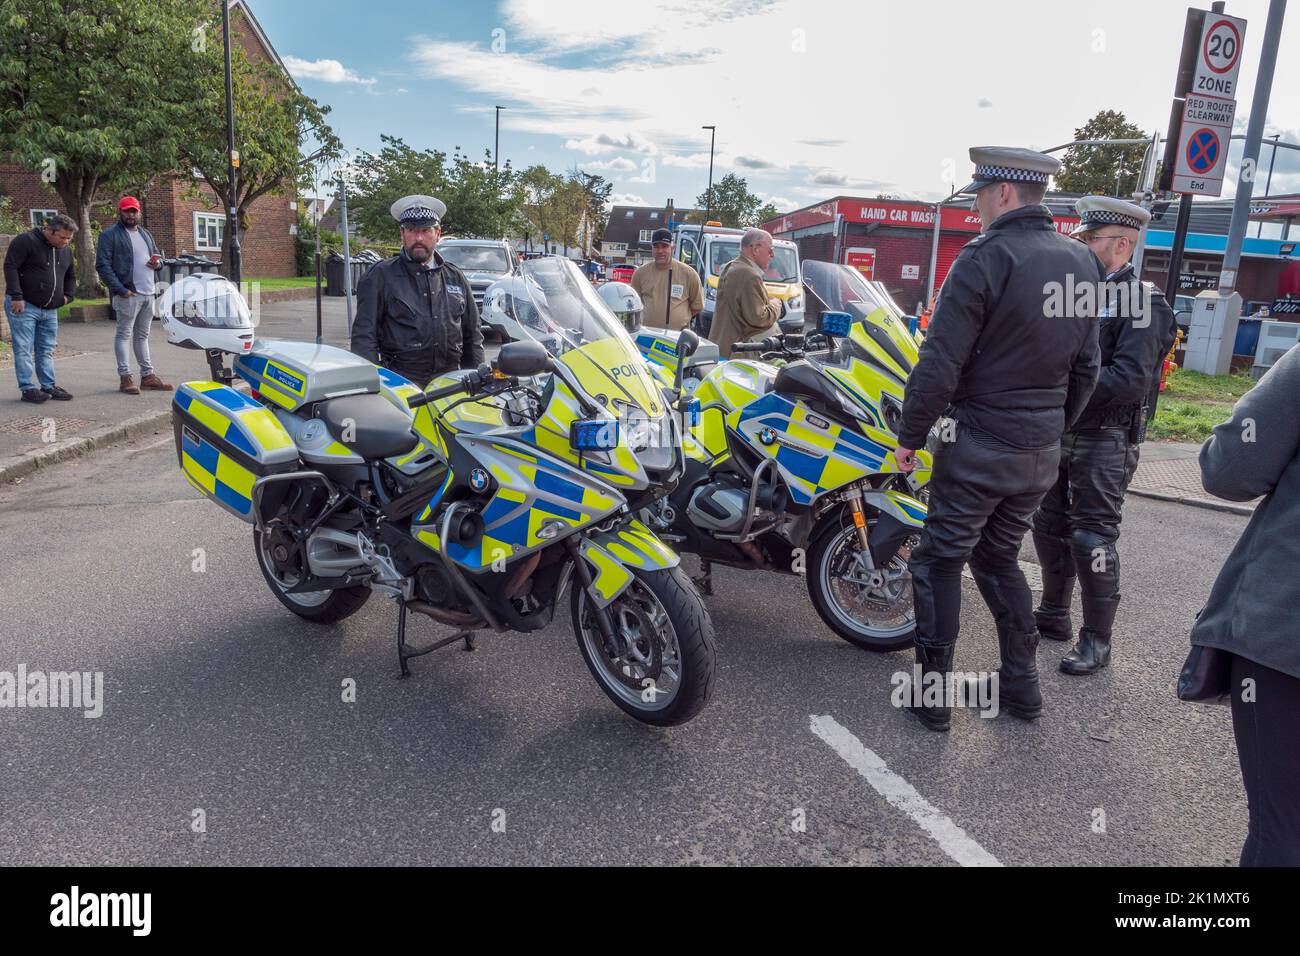 Metropolitan Police motorcycles and officers in Hounslow, UK. Stock Photo